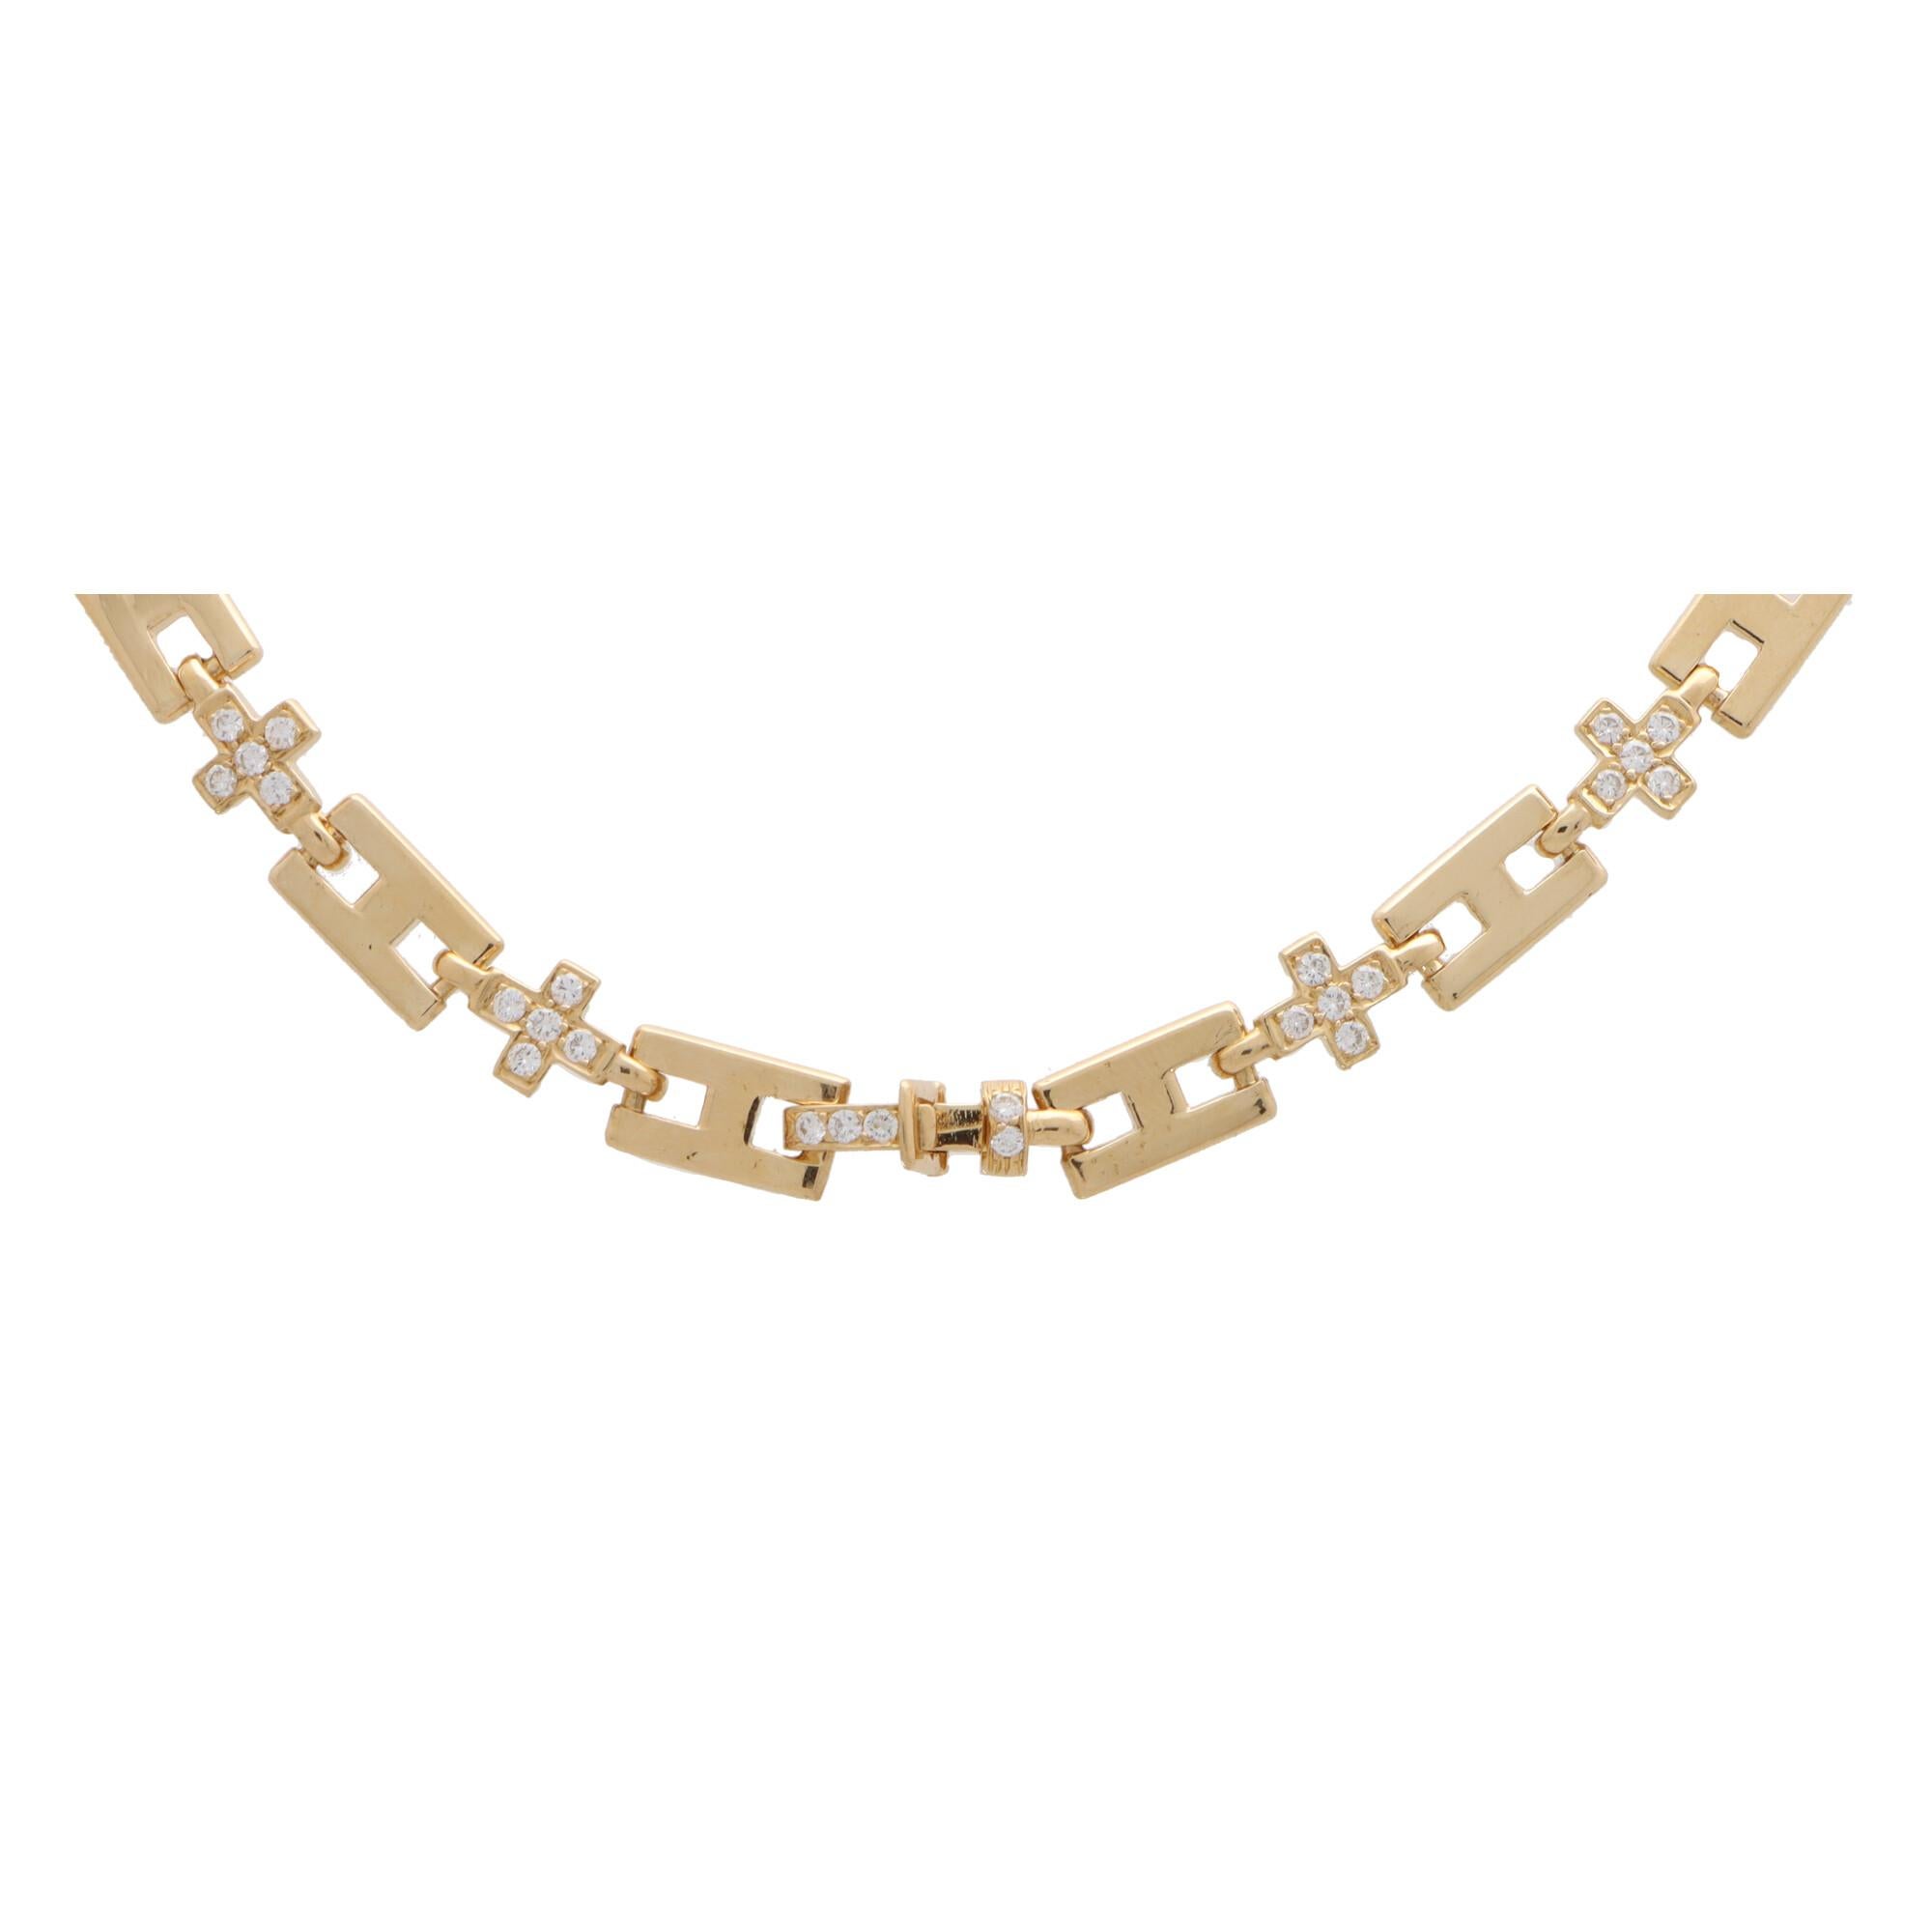 Modern Vintage Hermès Diamond Chain Link Necklace Set in 18k Yellow Gold For Sale